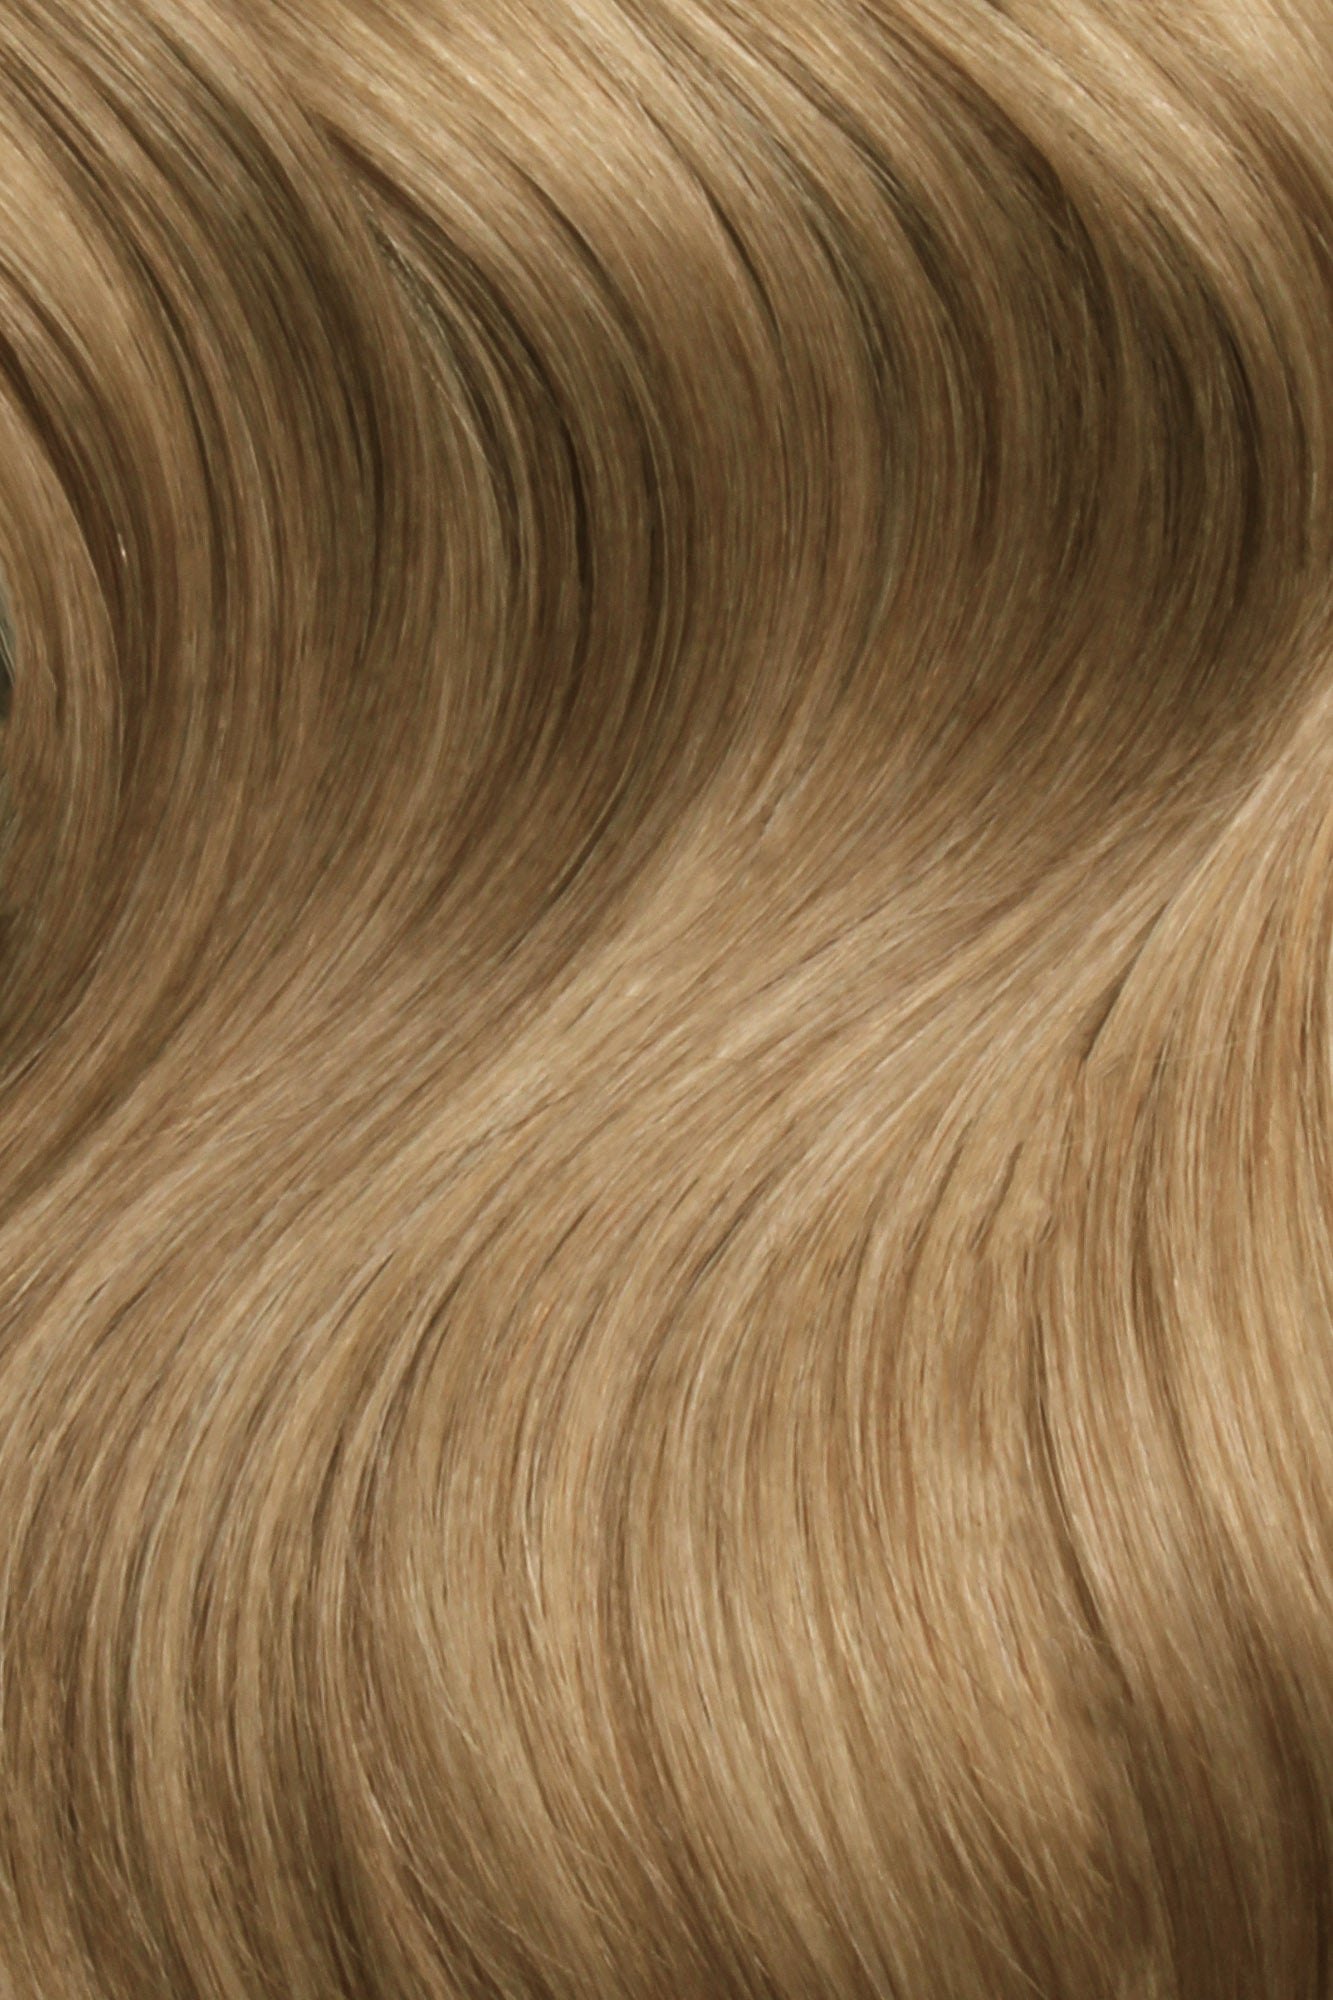 Nano Bonds 22 Inches - SWAY Hair Extensions Champagne-Chestnut-8-22 Ultra-fine, invisible bonds for a flawless, natural look. 100% Remy Human hair, lightweight and versatile. Reusable and perfect for individual or salon use.